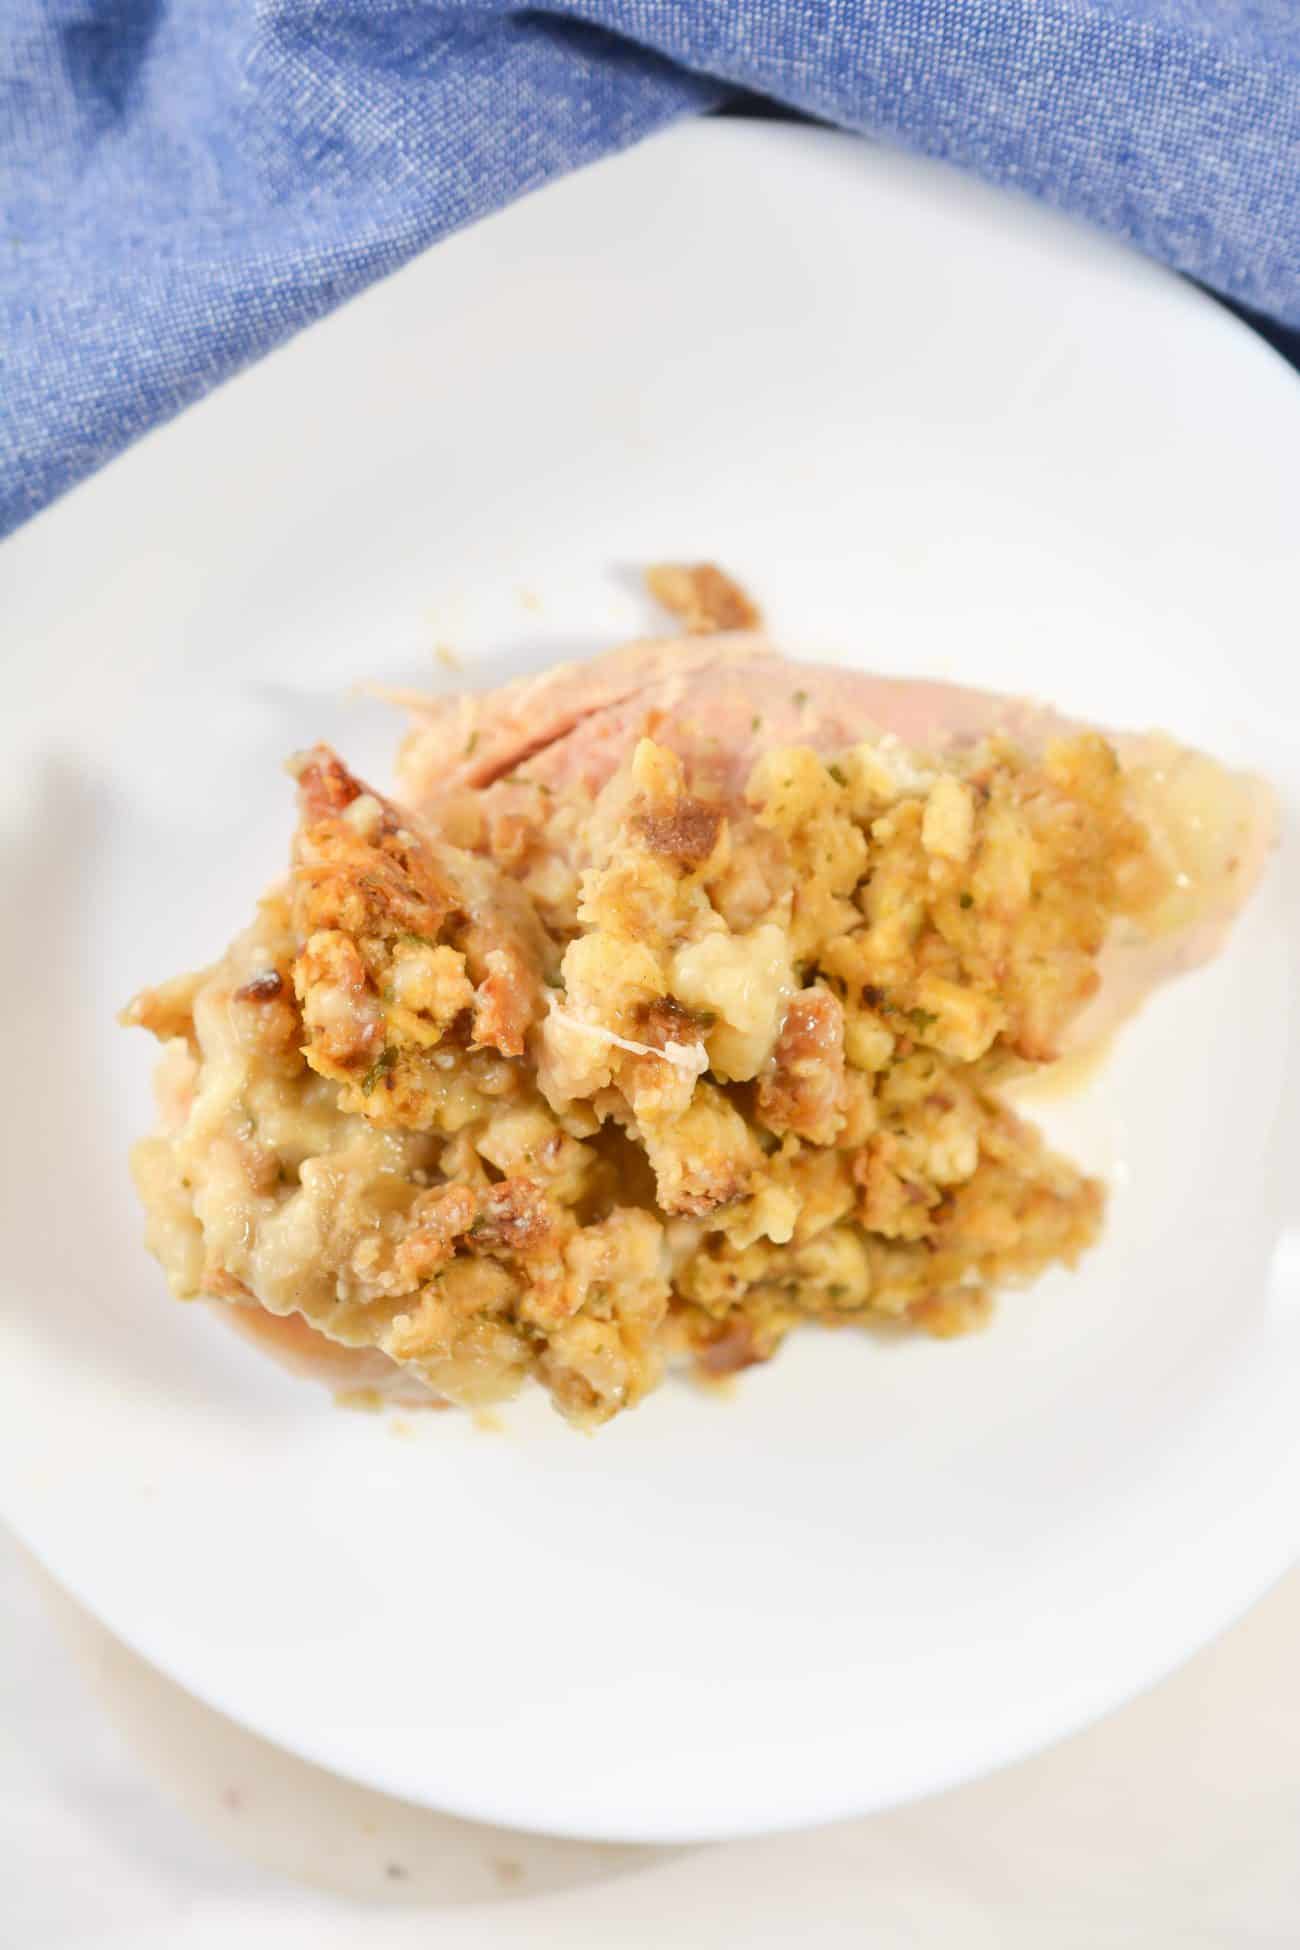 Hearty and Tasty Chicken and Stuffing